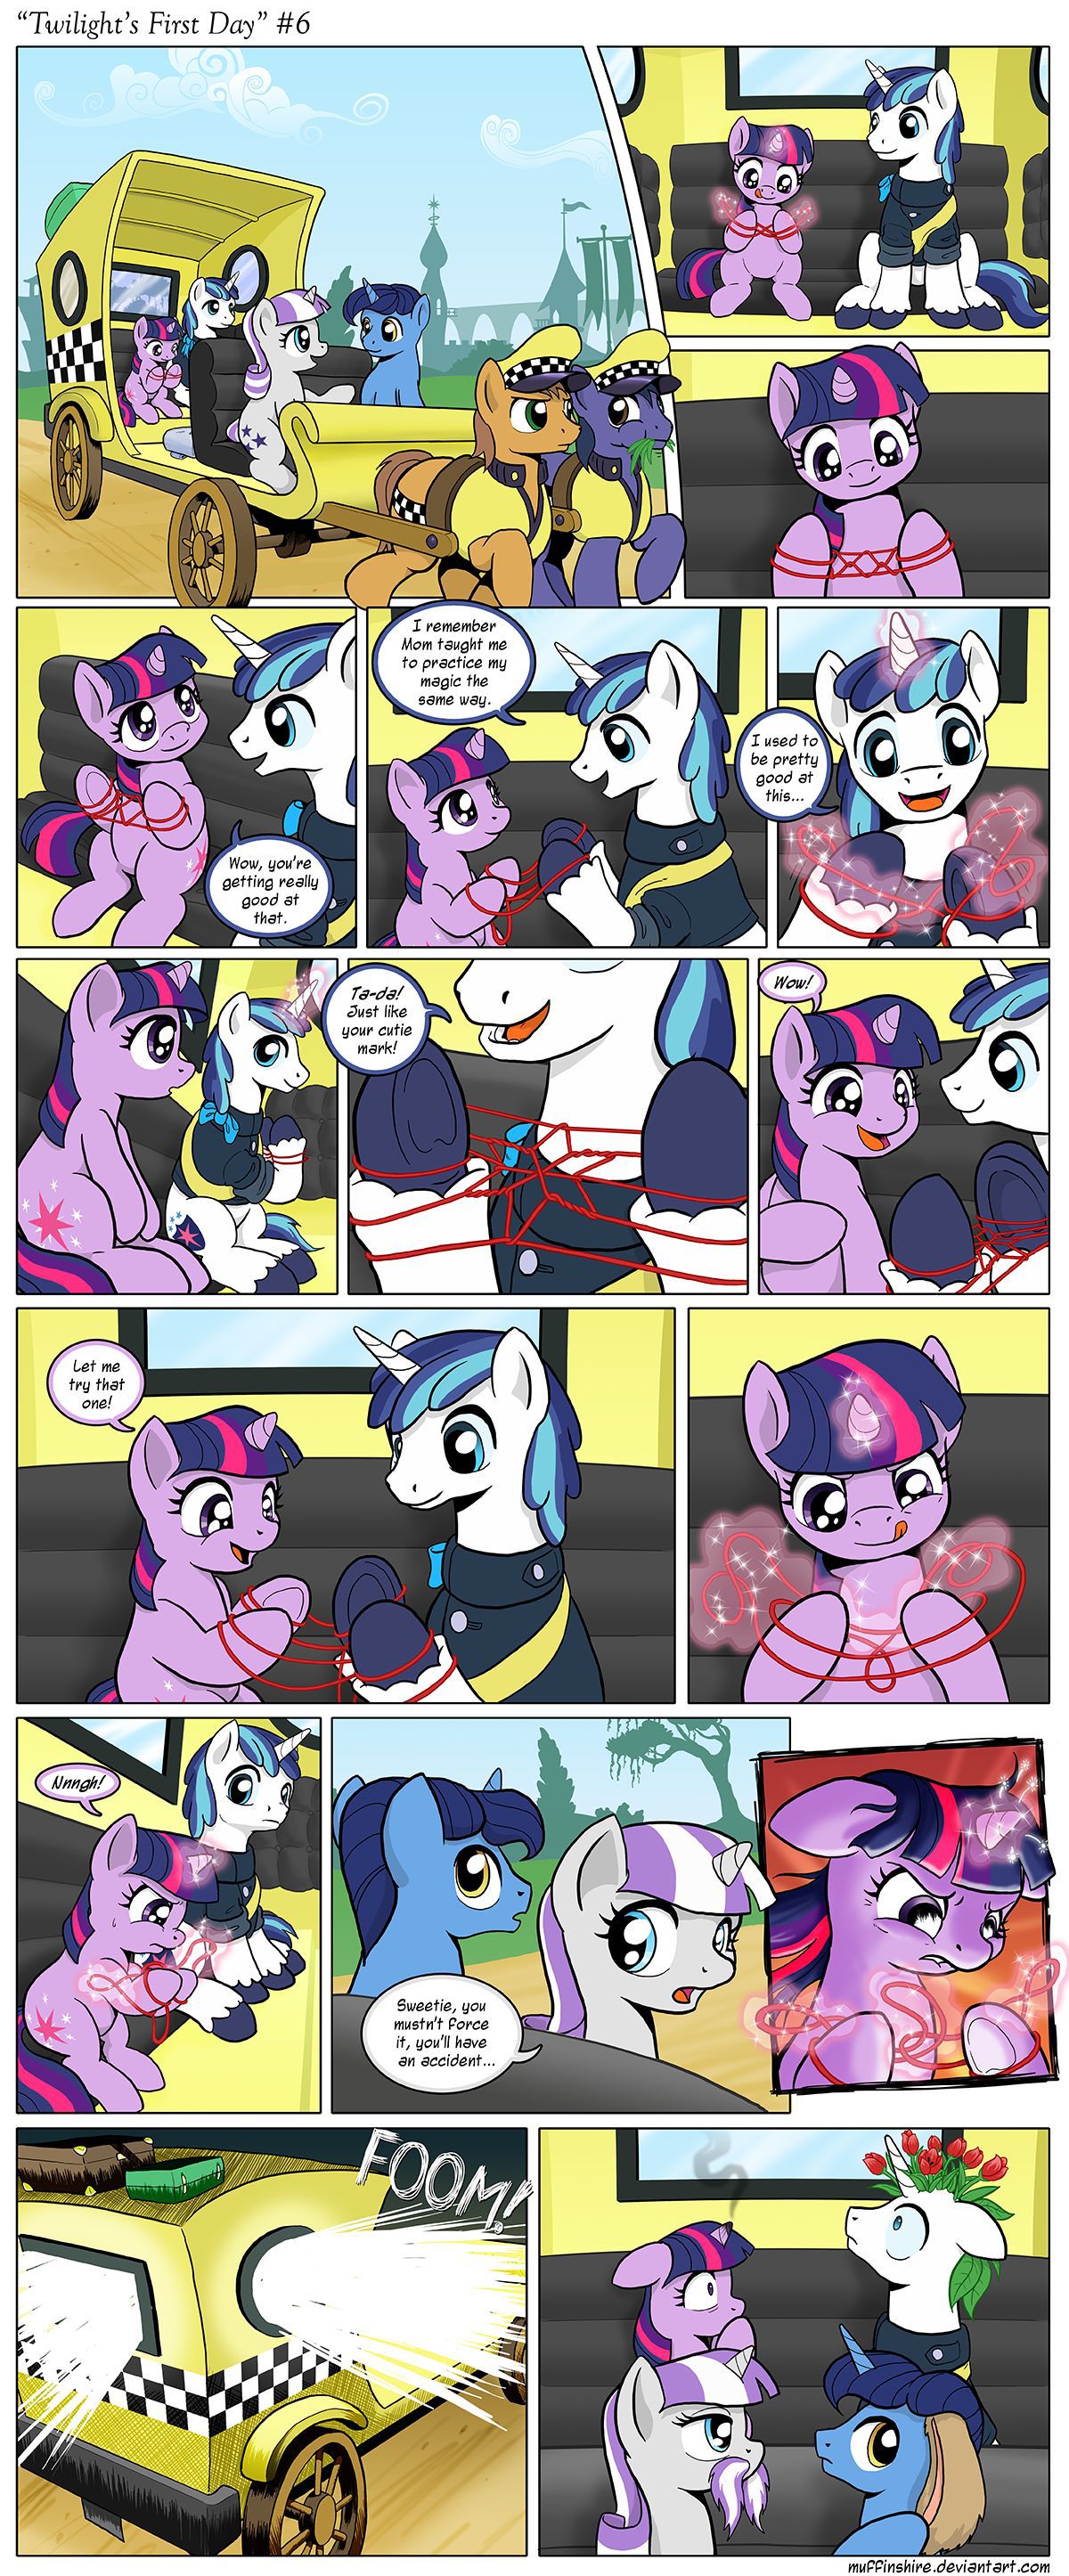 [Muffinshire] Twilight's First Day (My Little Pony: Friendship is Magic) [English] 6